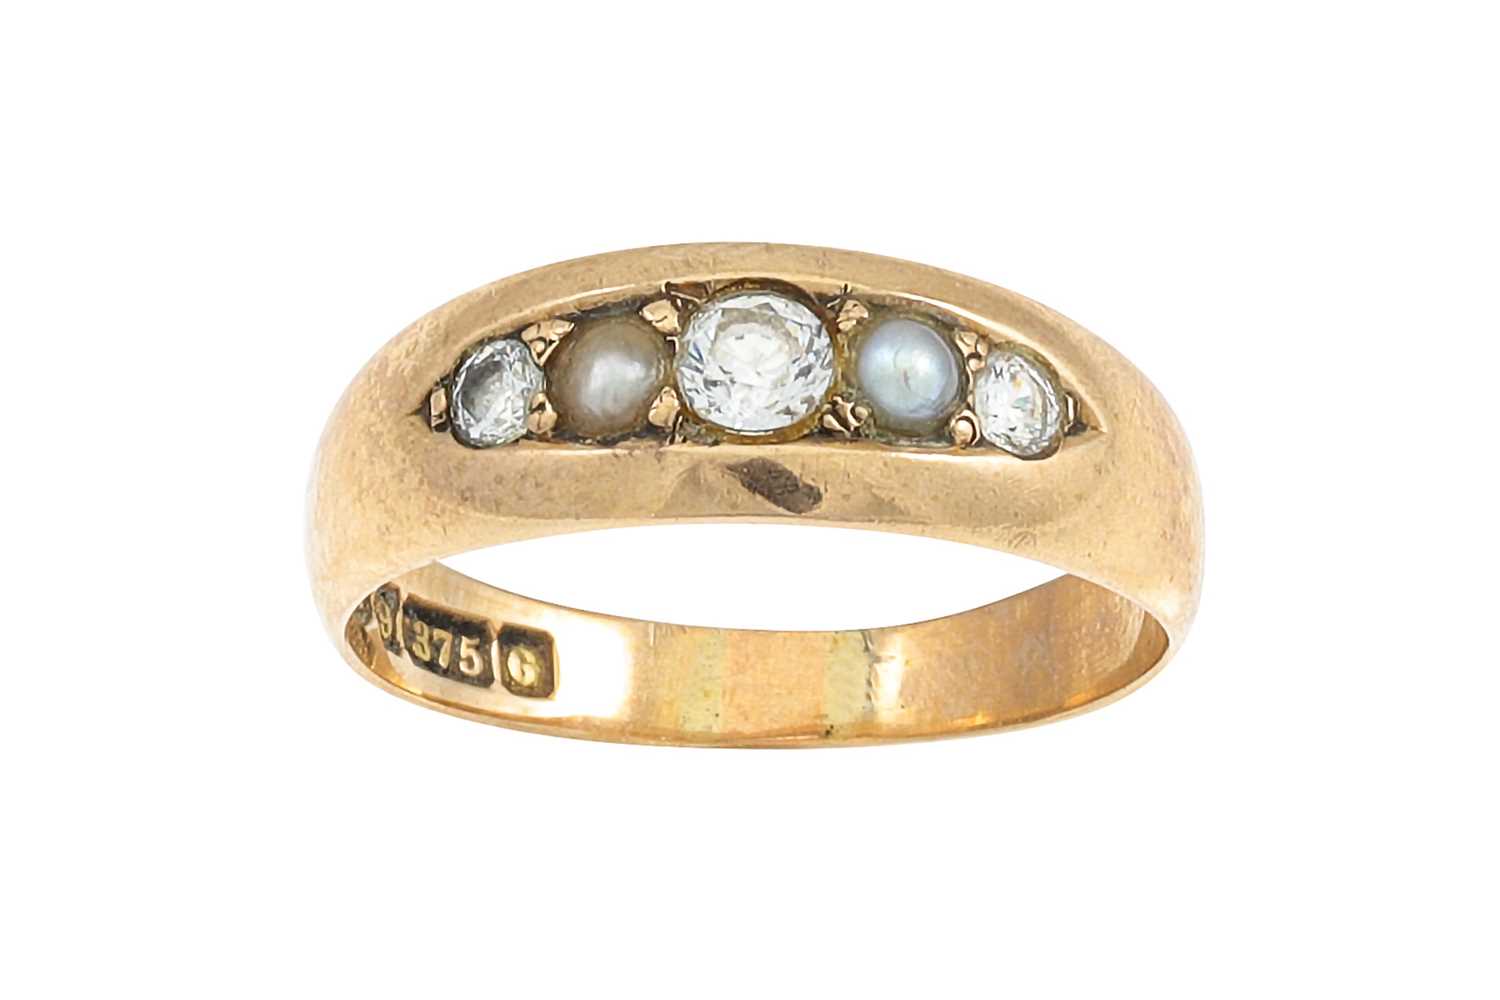 Lot 172 - A VINTAGE PEARL RING, mounted in 9ct gold